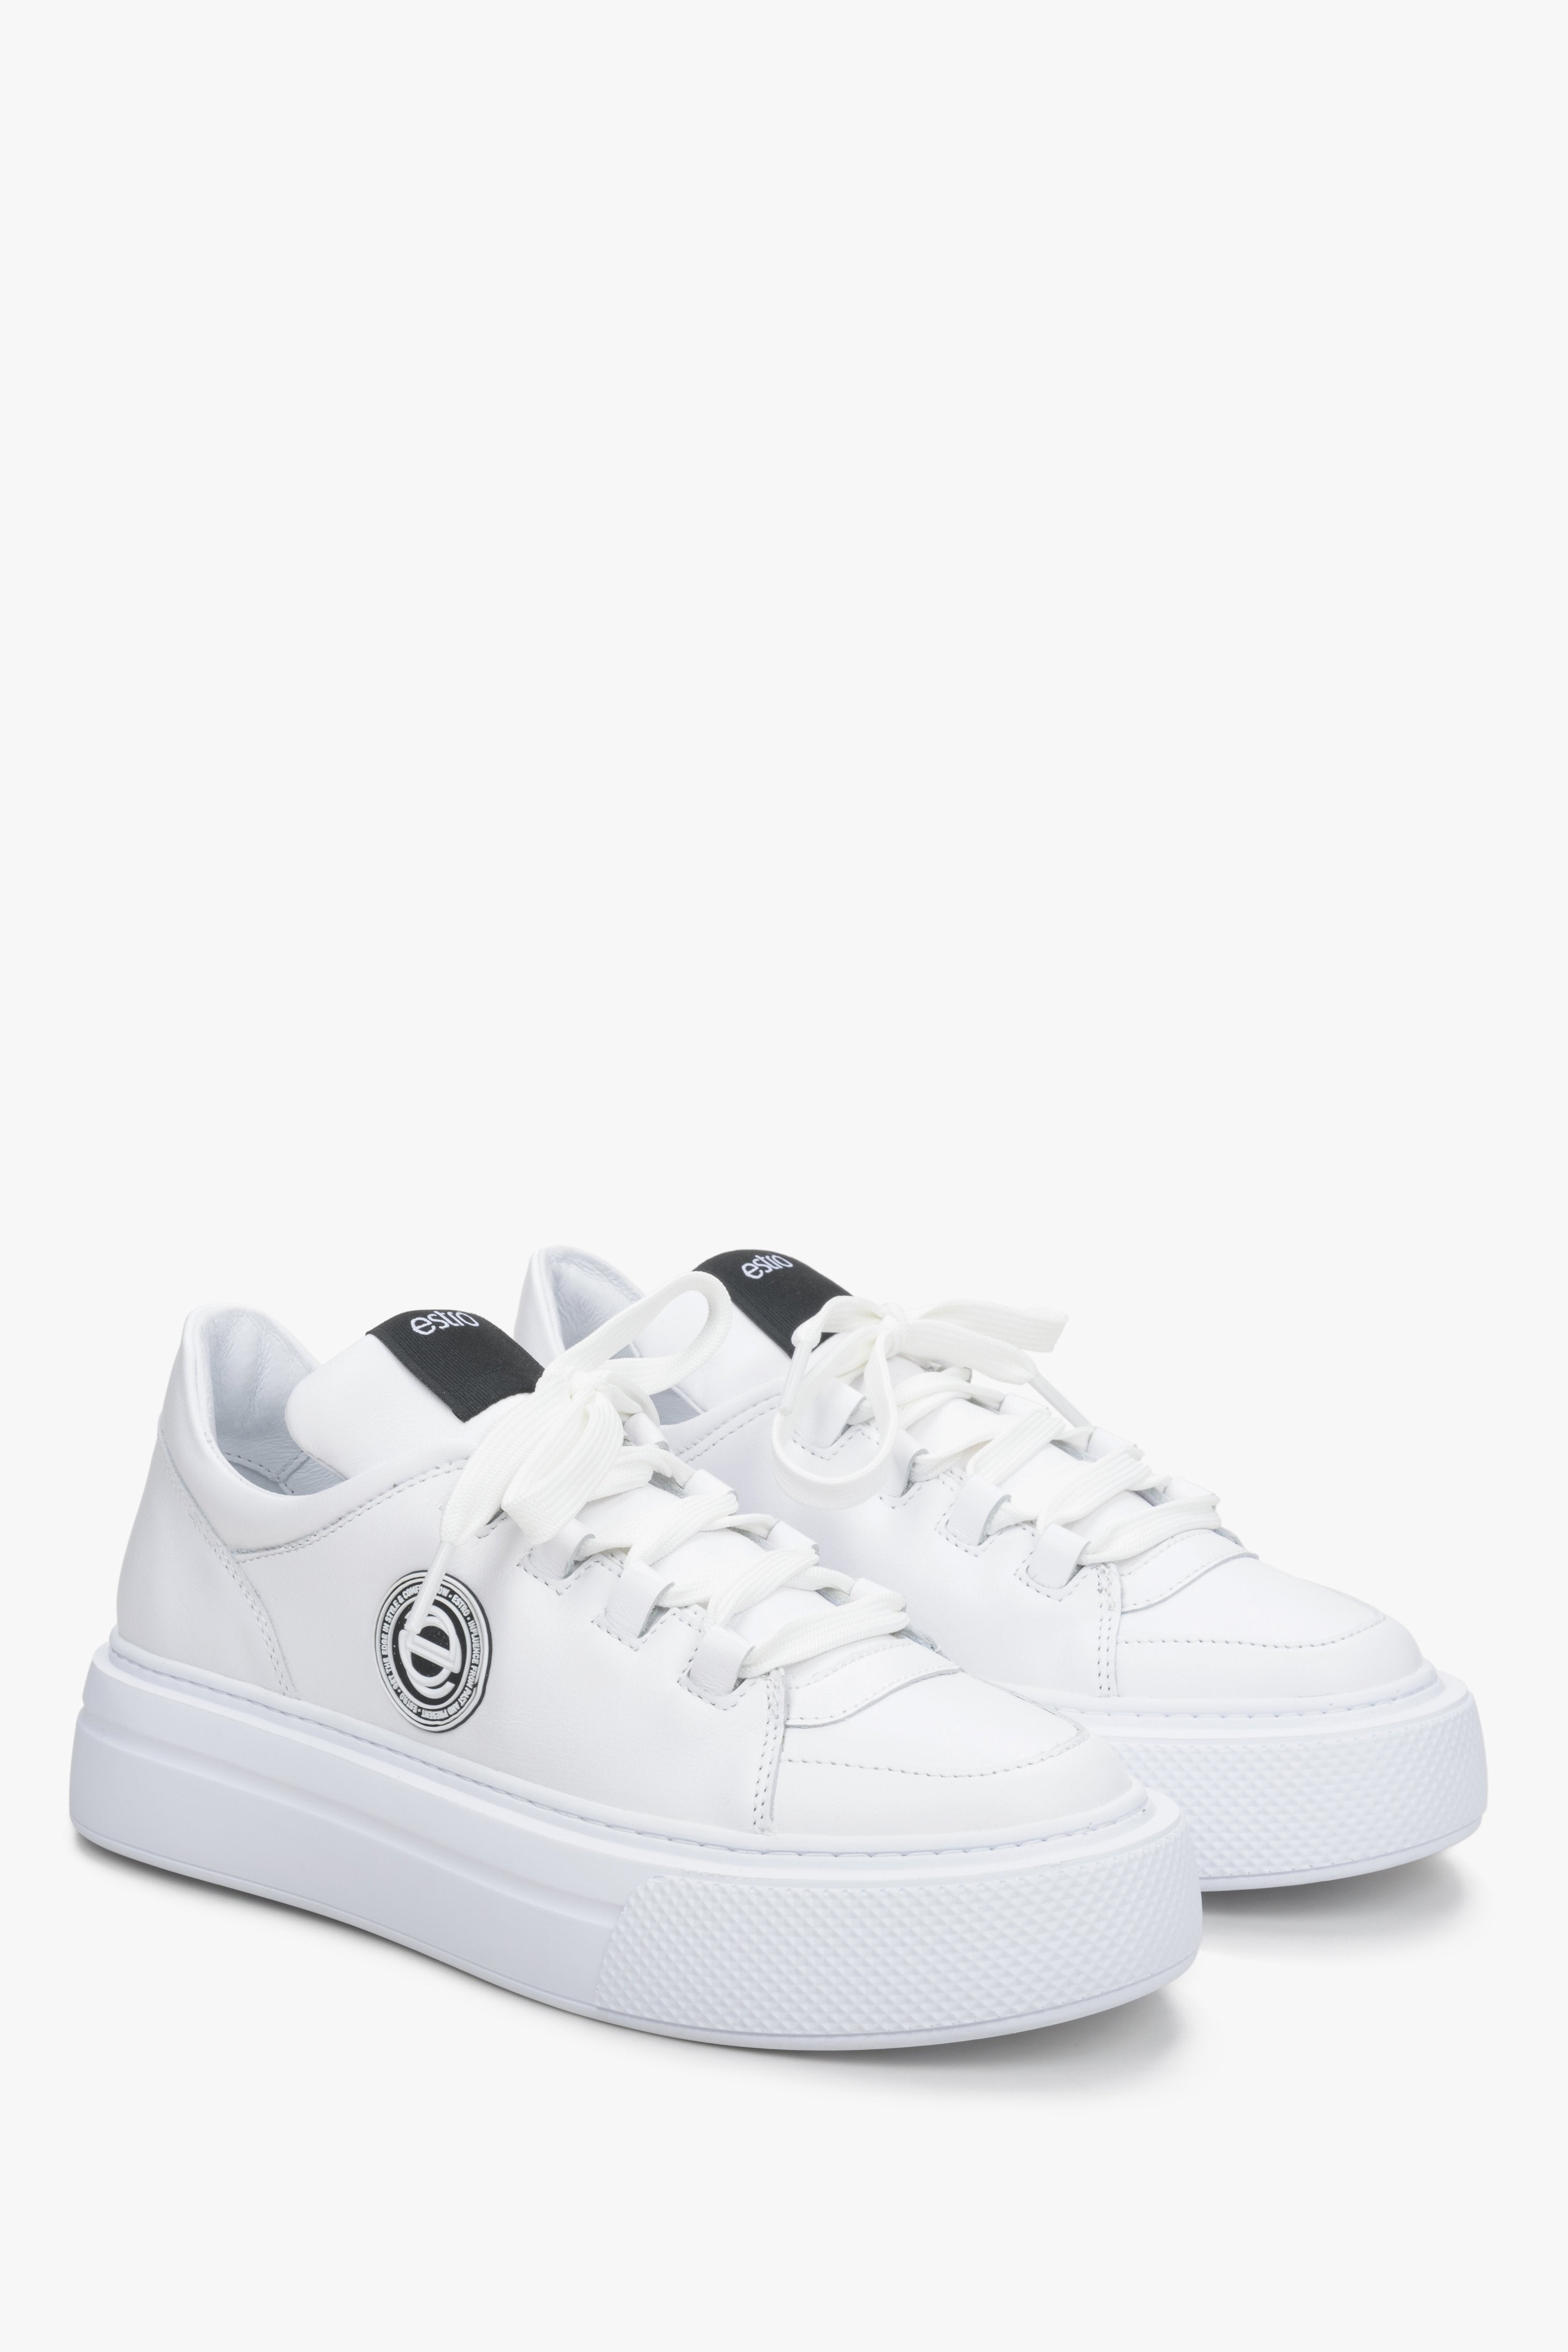 Women's white platform sneakers made of genuine leather by Estro.